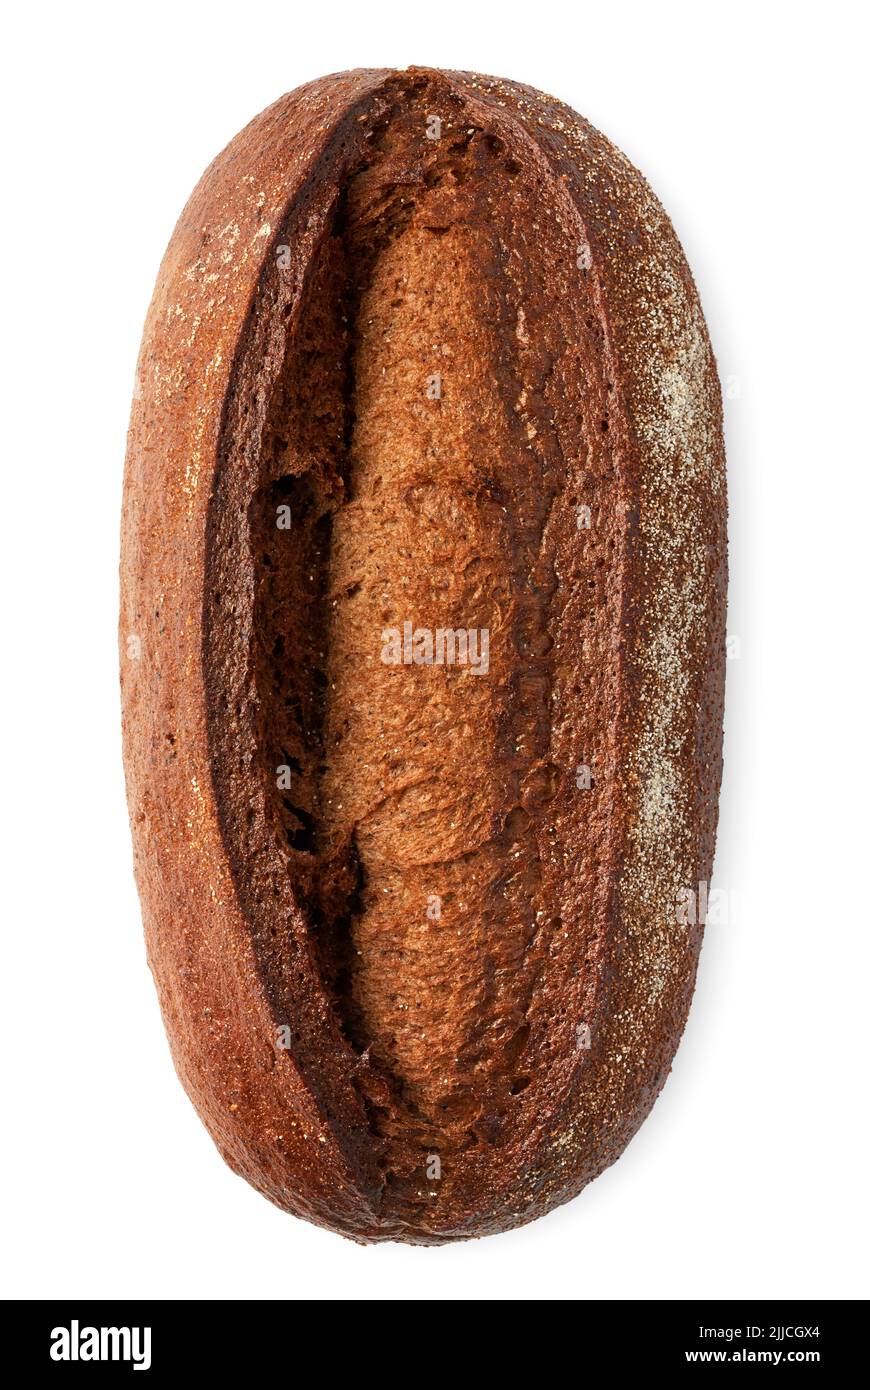 Traditional homemade dark rye bread, isolated on white background Stock Photo